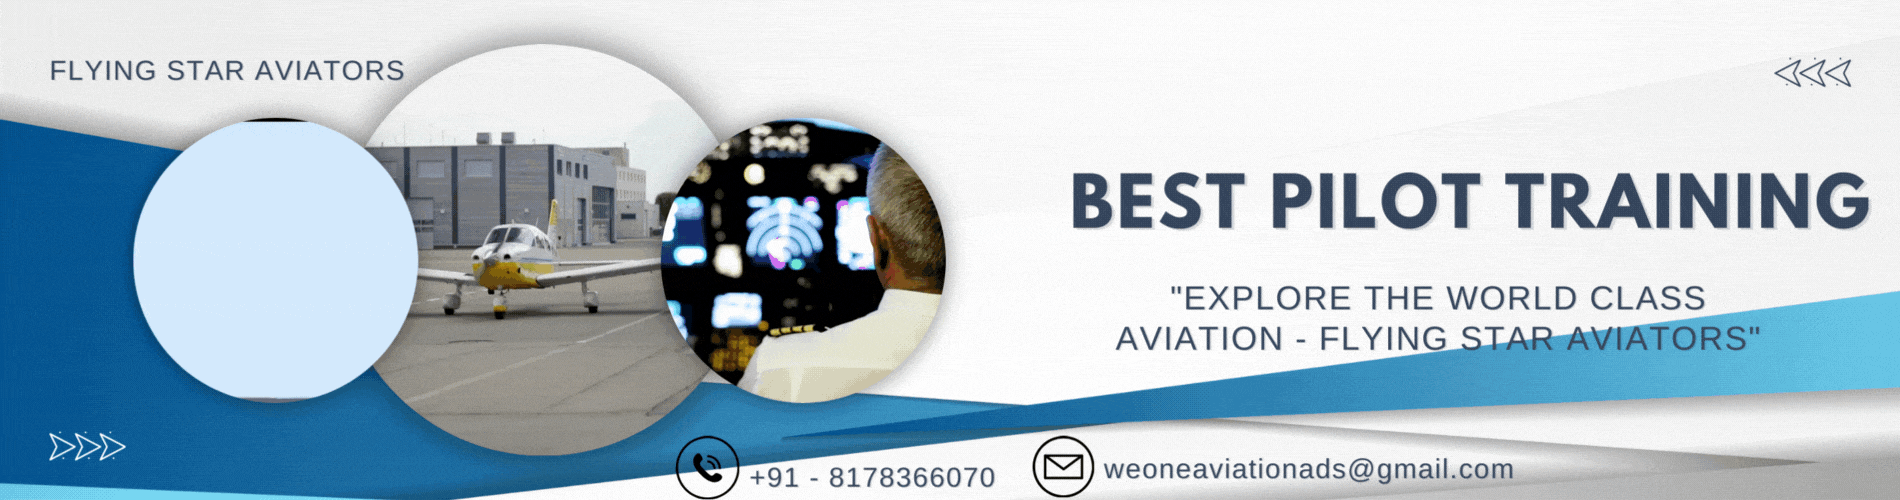 Get the Best Pilot Training at Flying Star Aviators